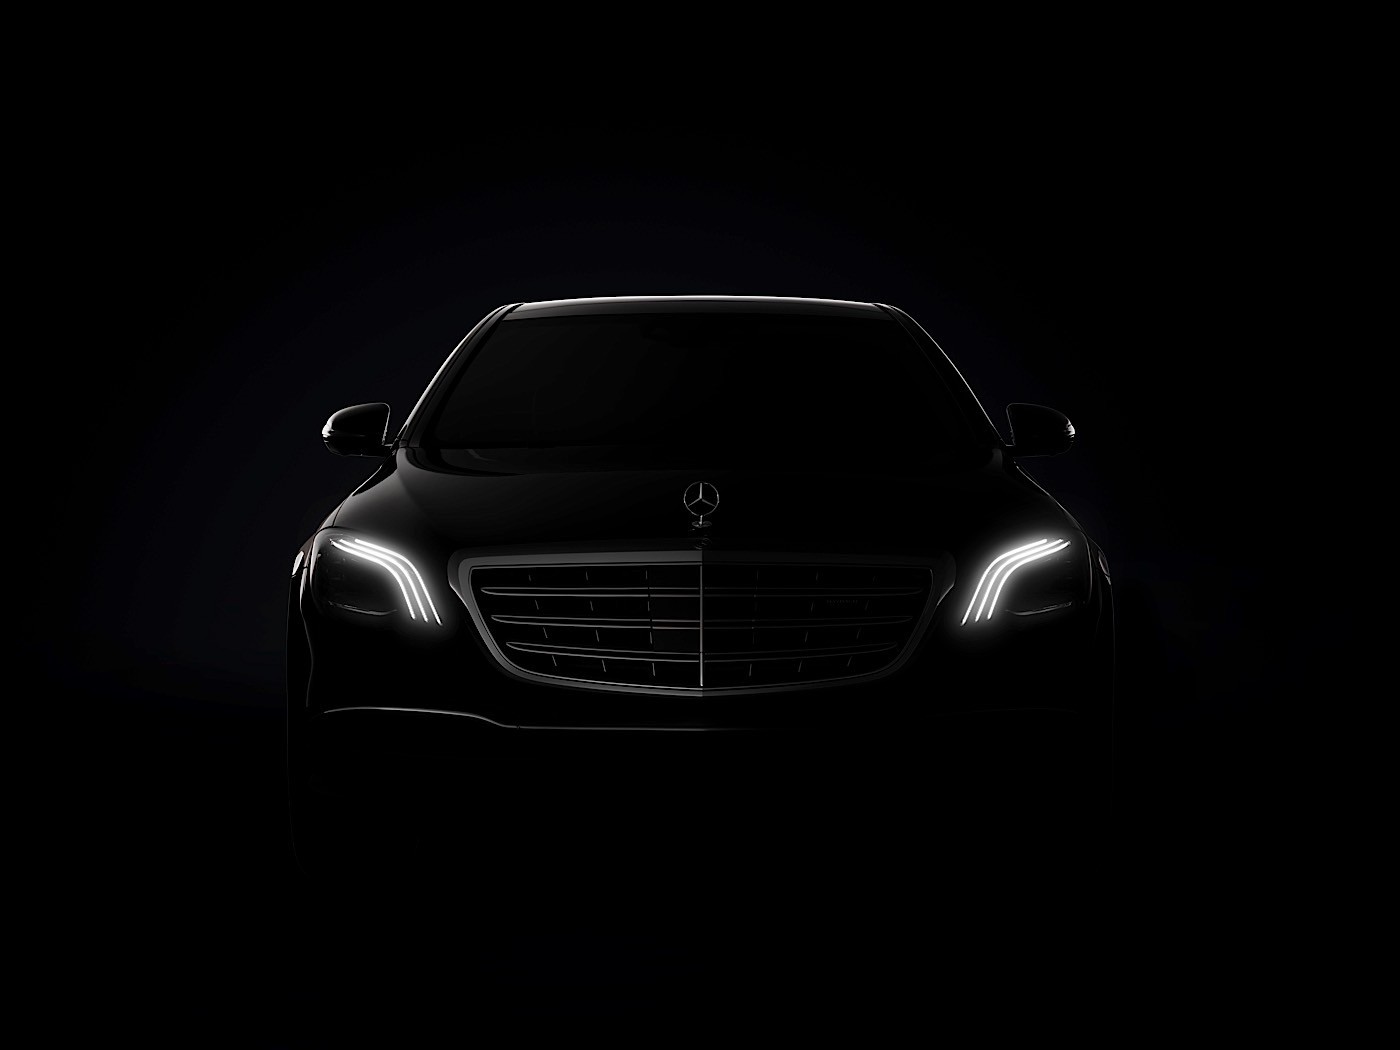 Mercedes Benz S Class W222 Facelift Is Teased One Last Time